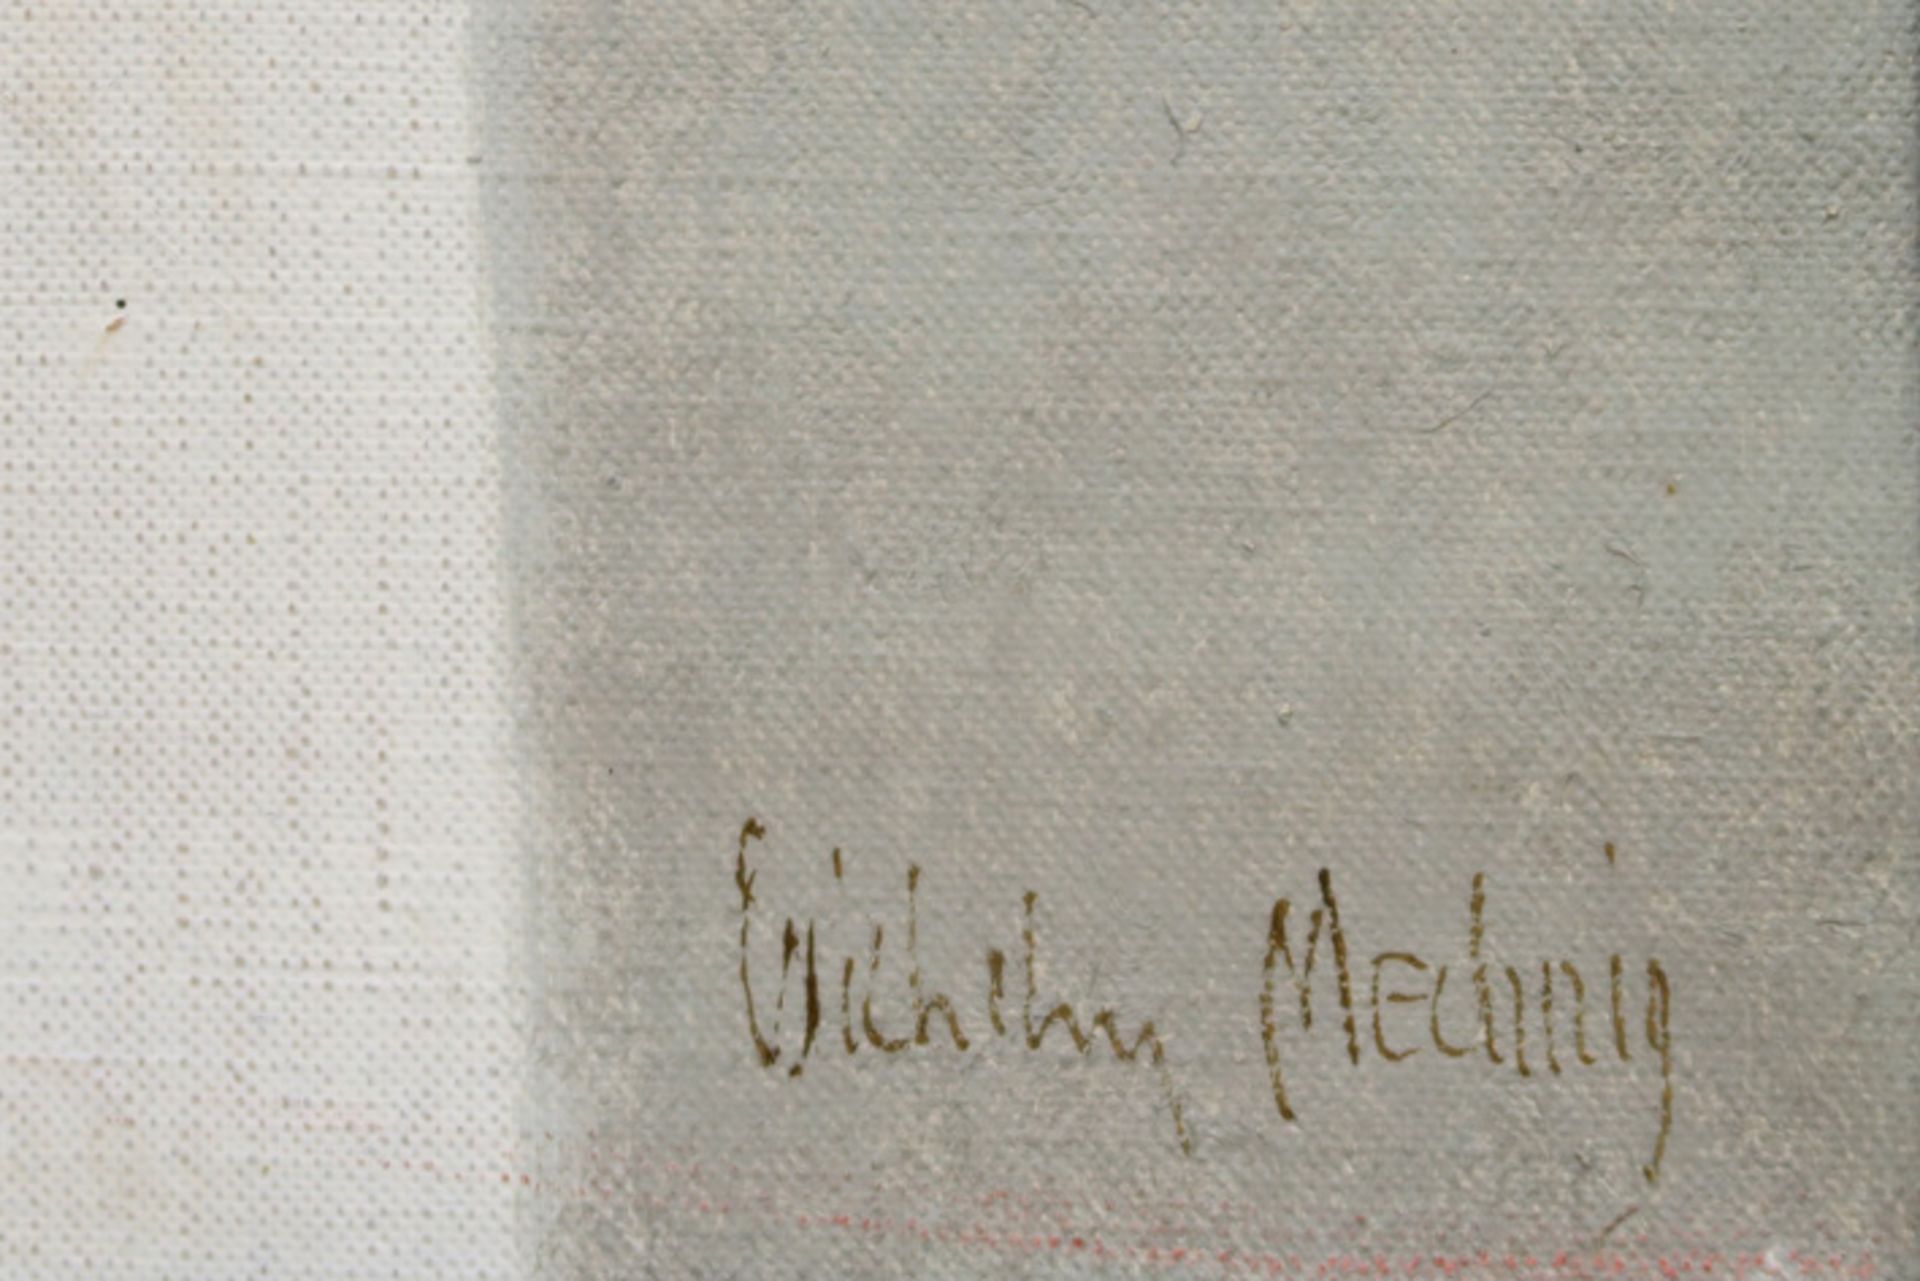 20th Cent. abstract oil on canvas and drawing - signed Wilhelm Mechnig || MECHNIG WILHELM (1929 - - Image 3 of 8